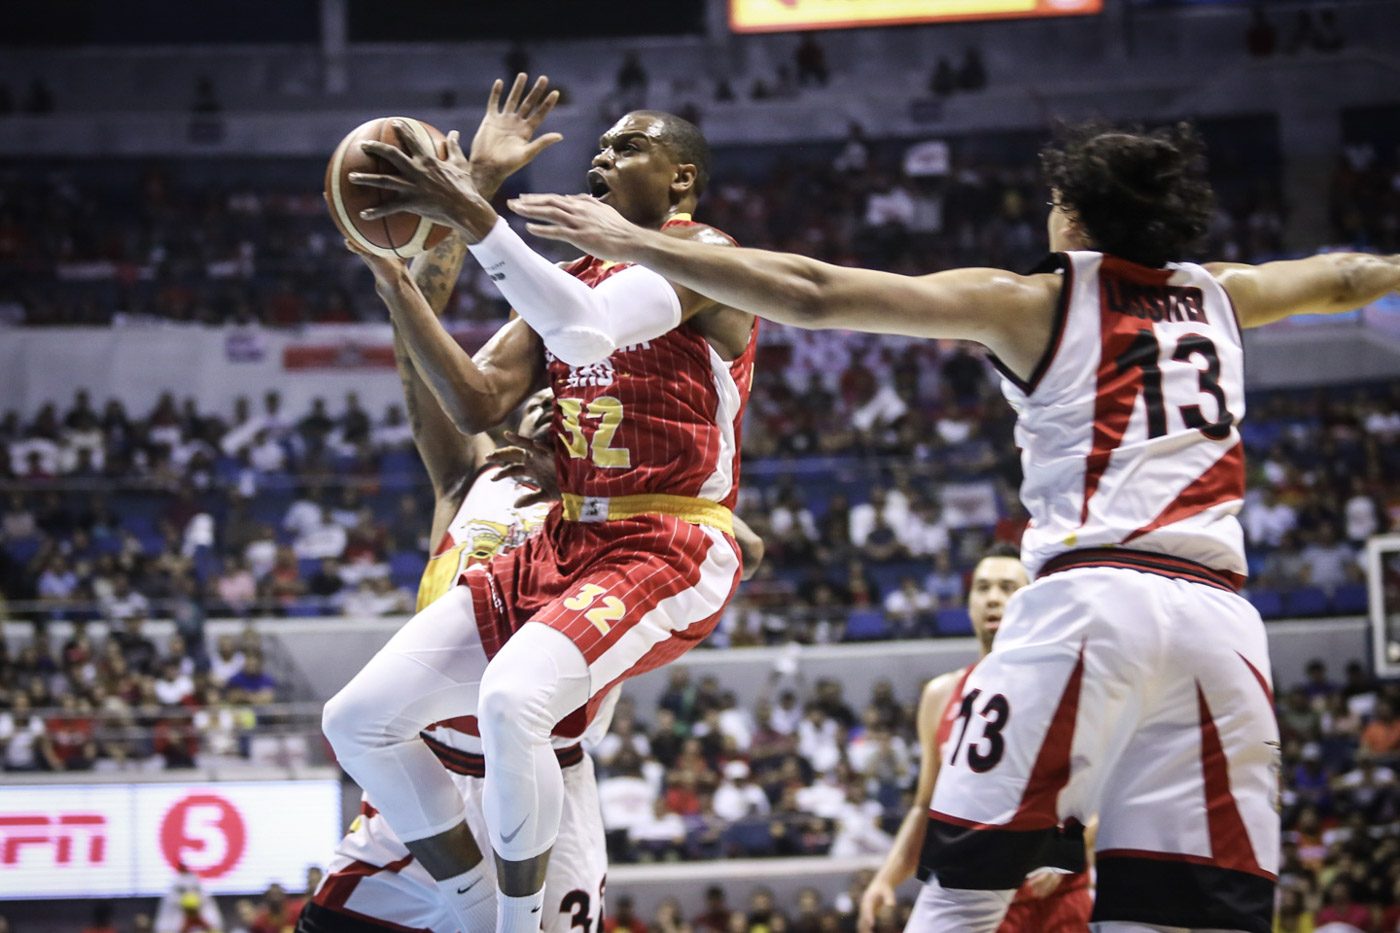 LA Tenorio all praise for red-hot Brownlee